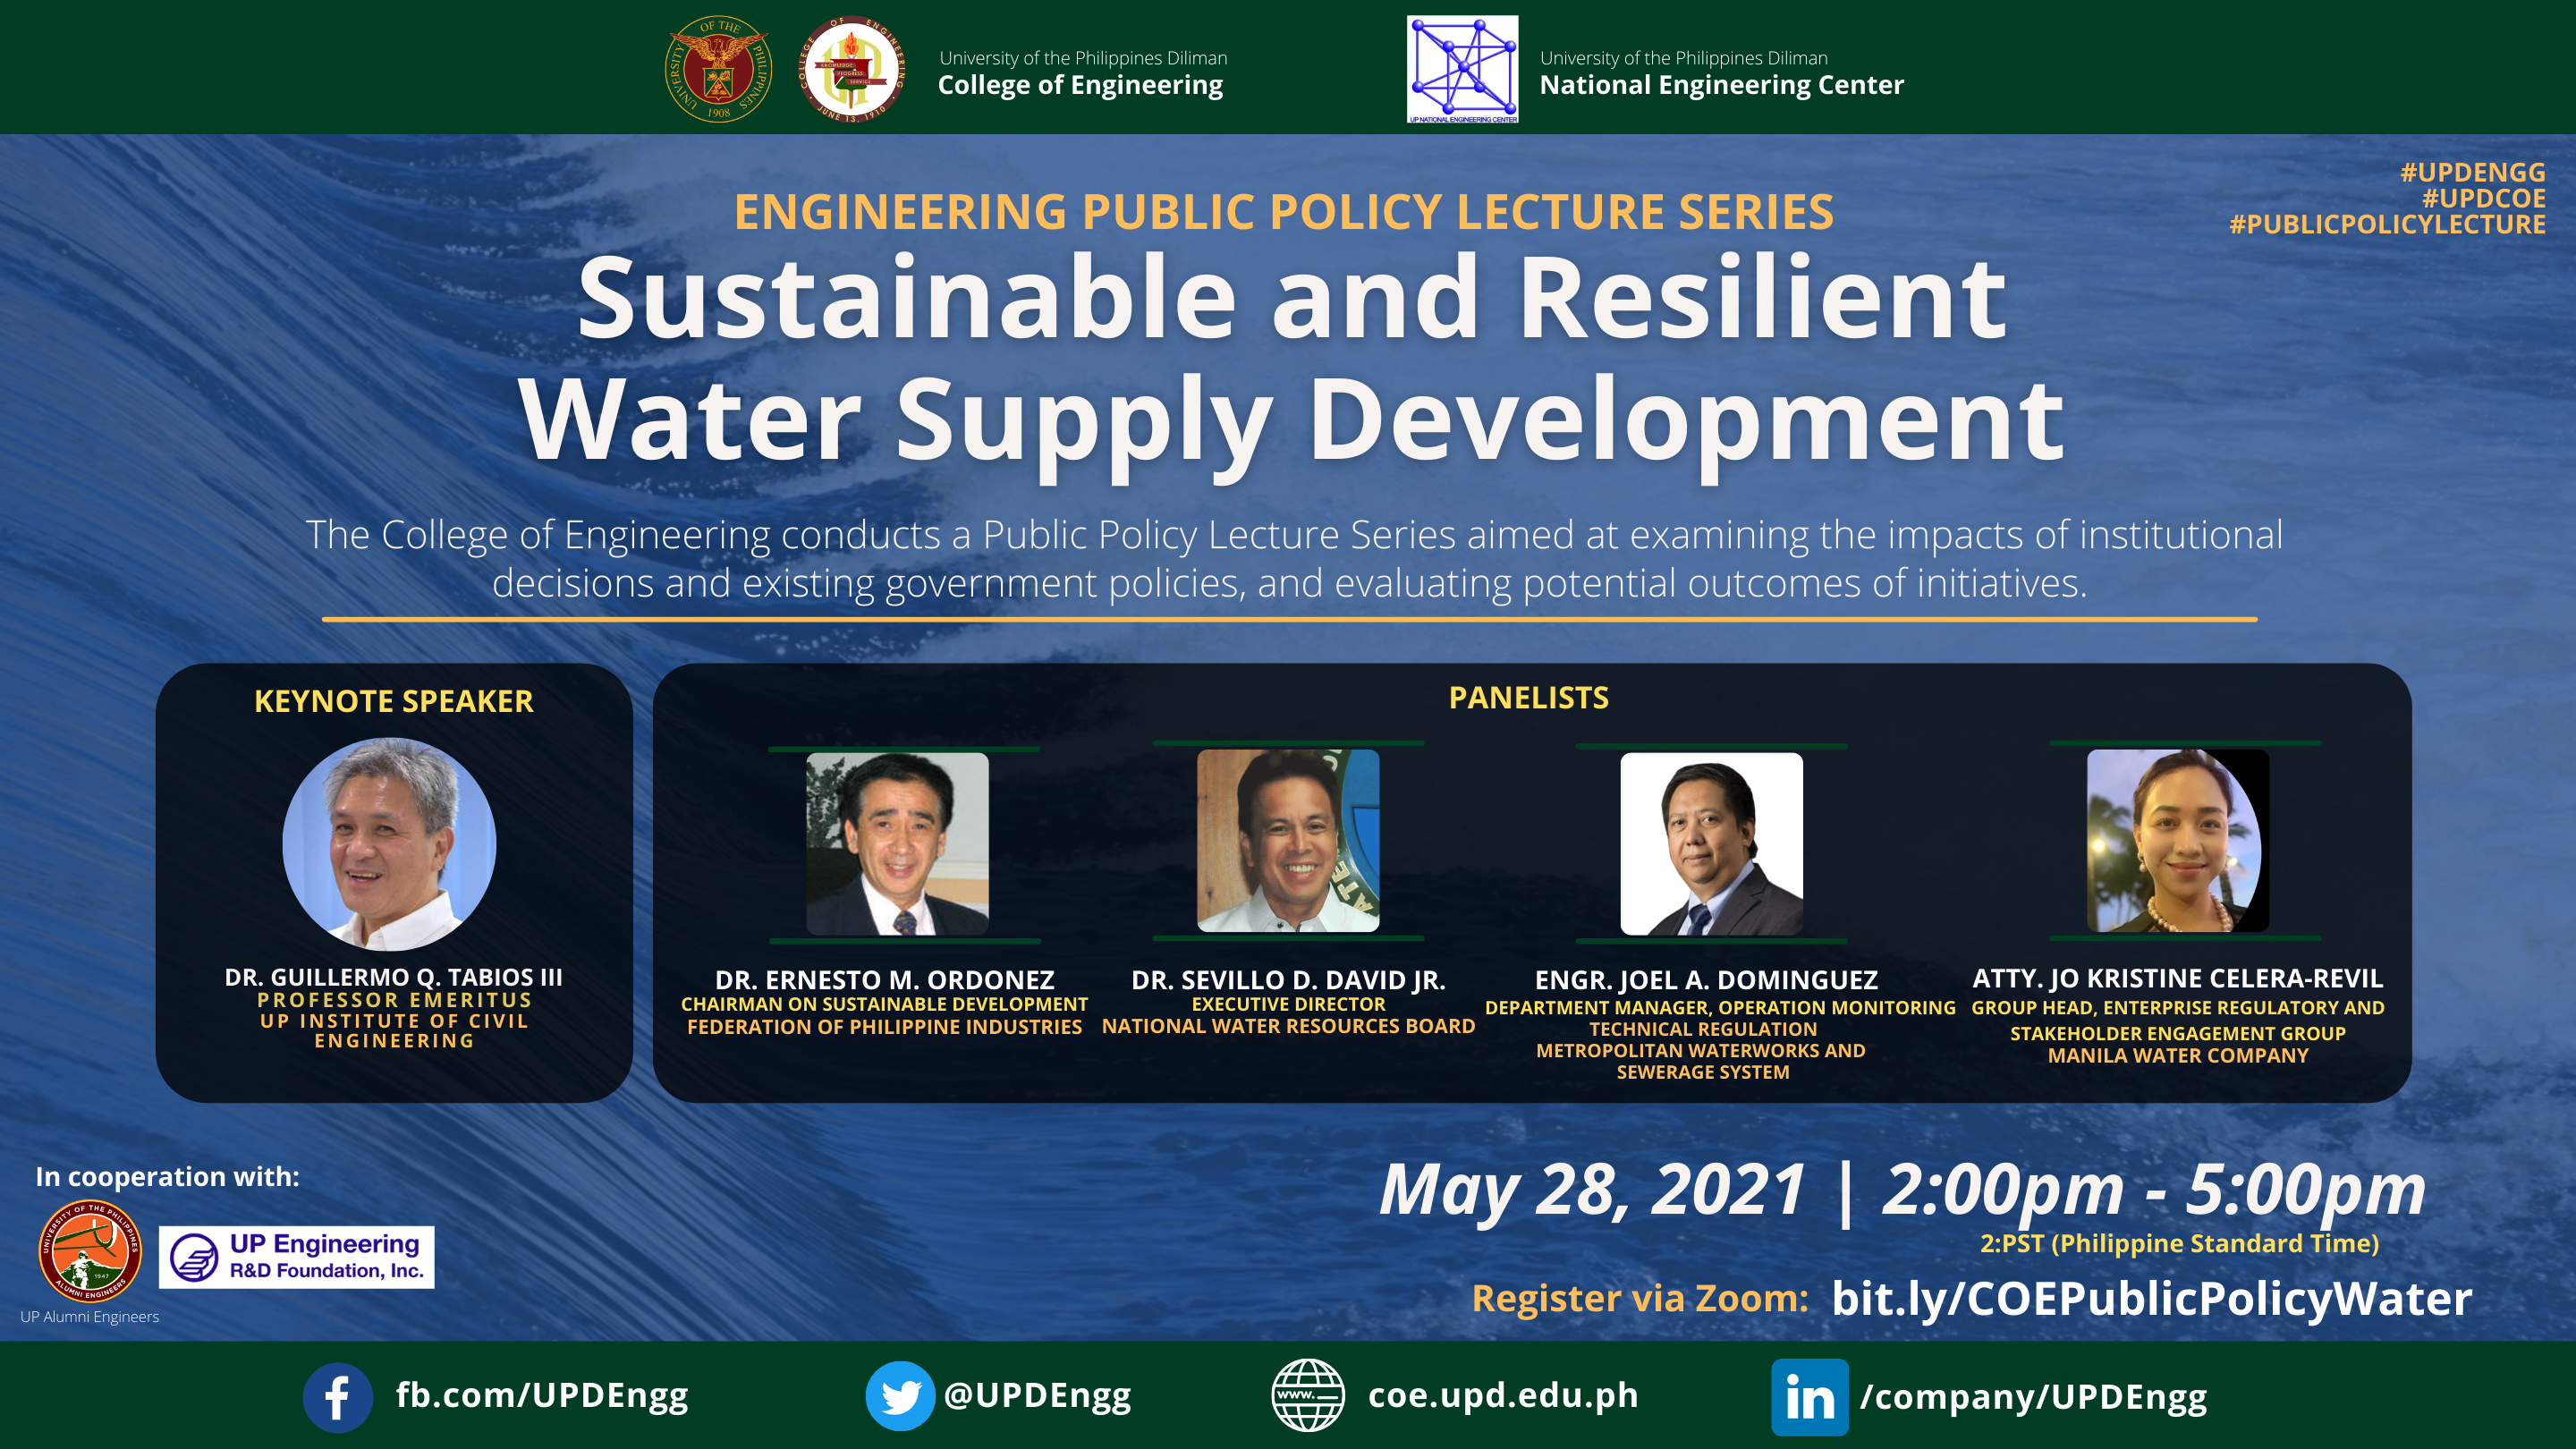 SUSTAINABLE and RESILIENT WATER SUPPLY DEVELOPMENT: Engineering Public Policy Lecture Webinar Series